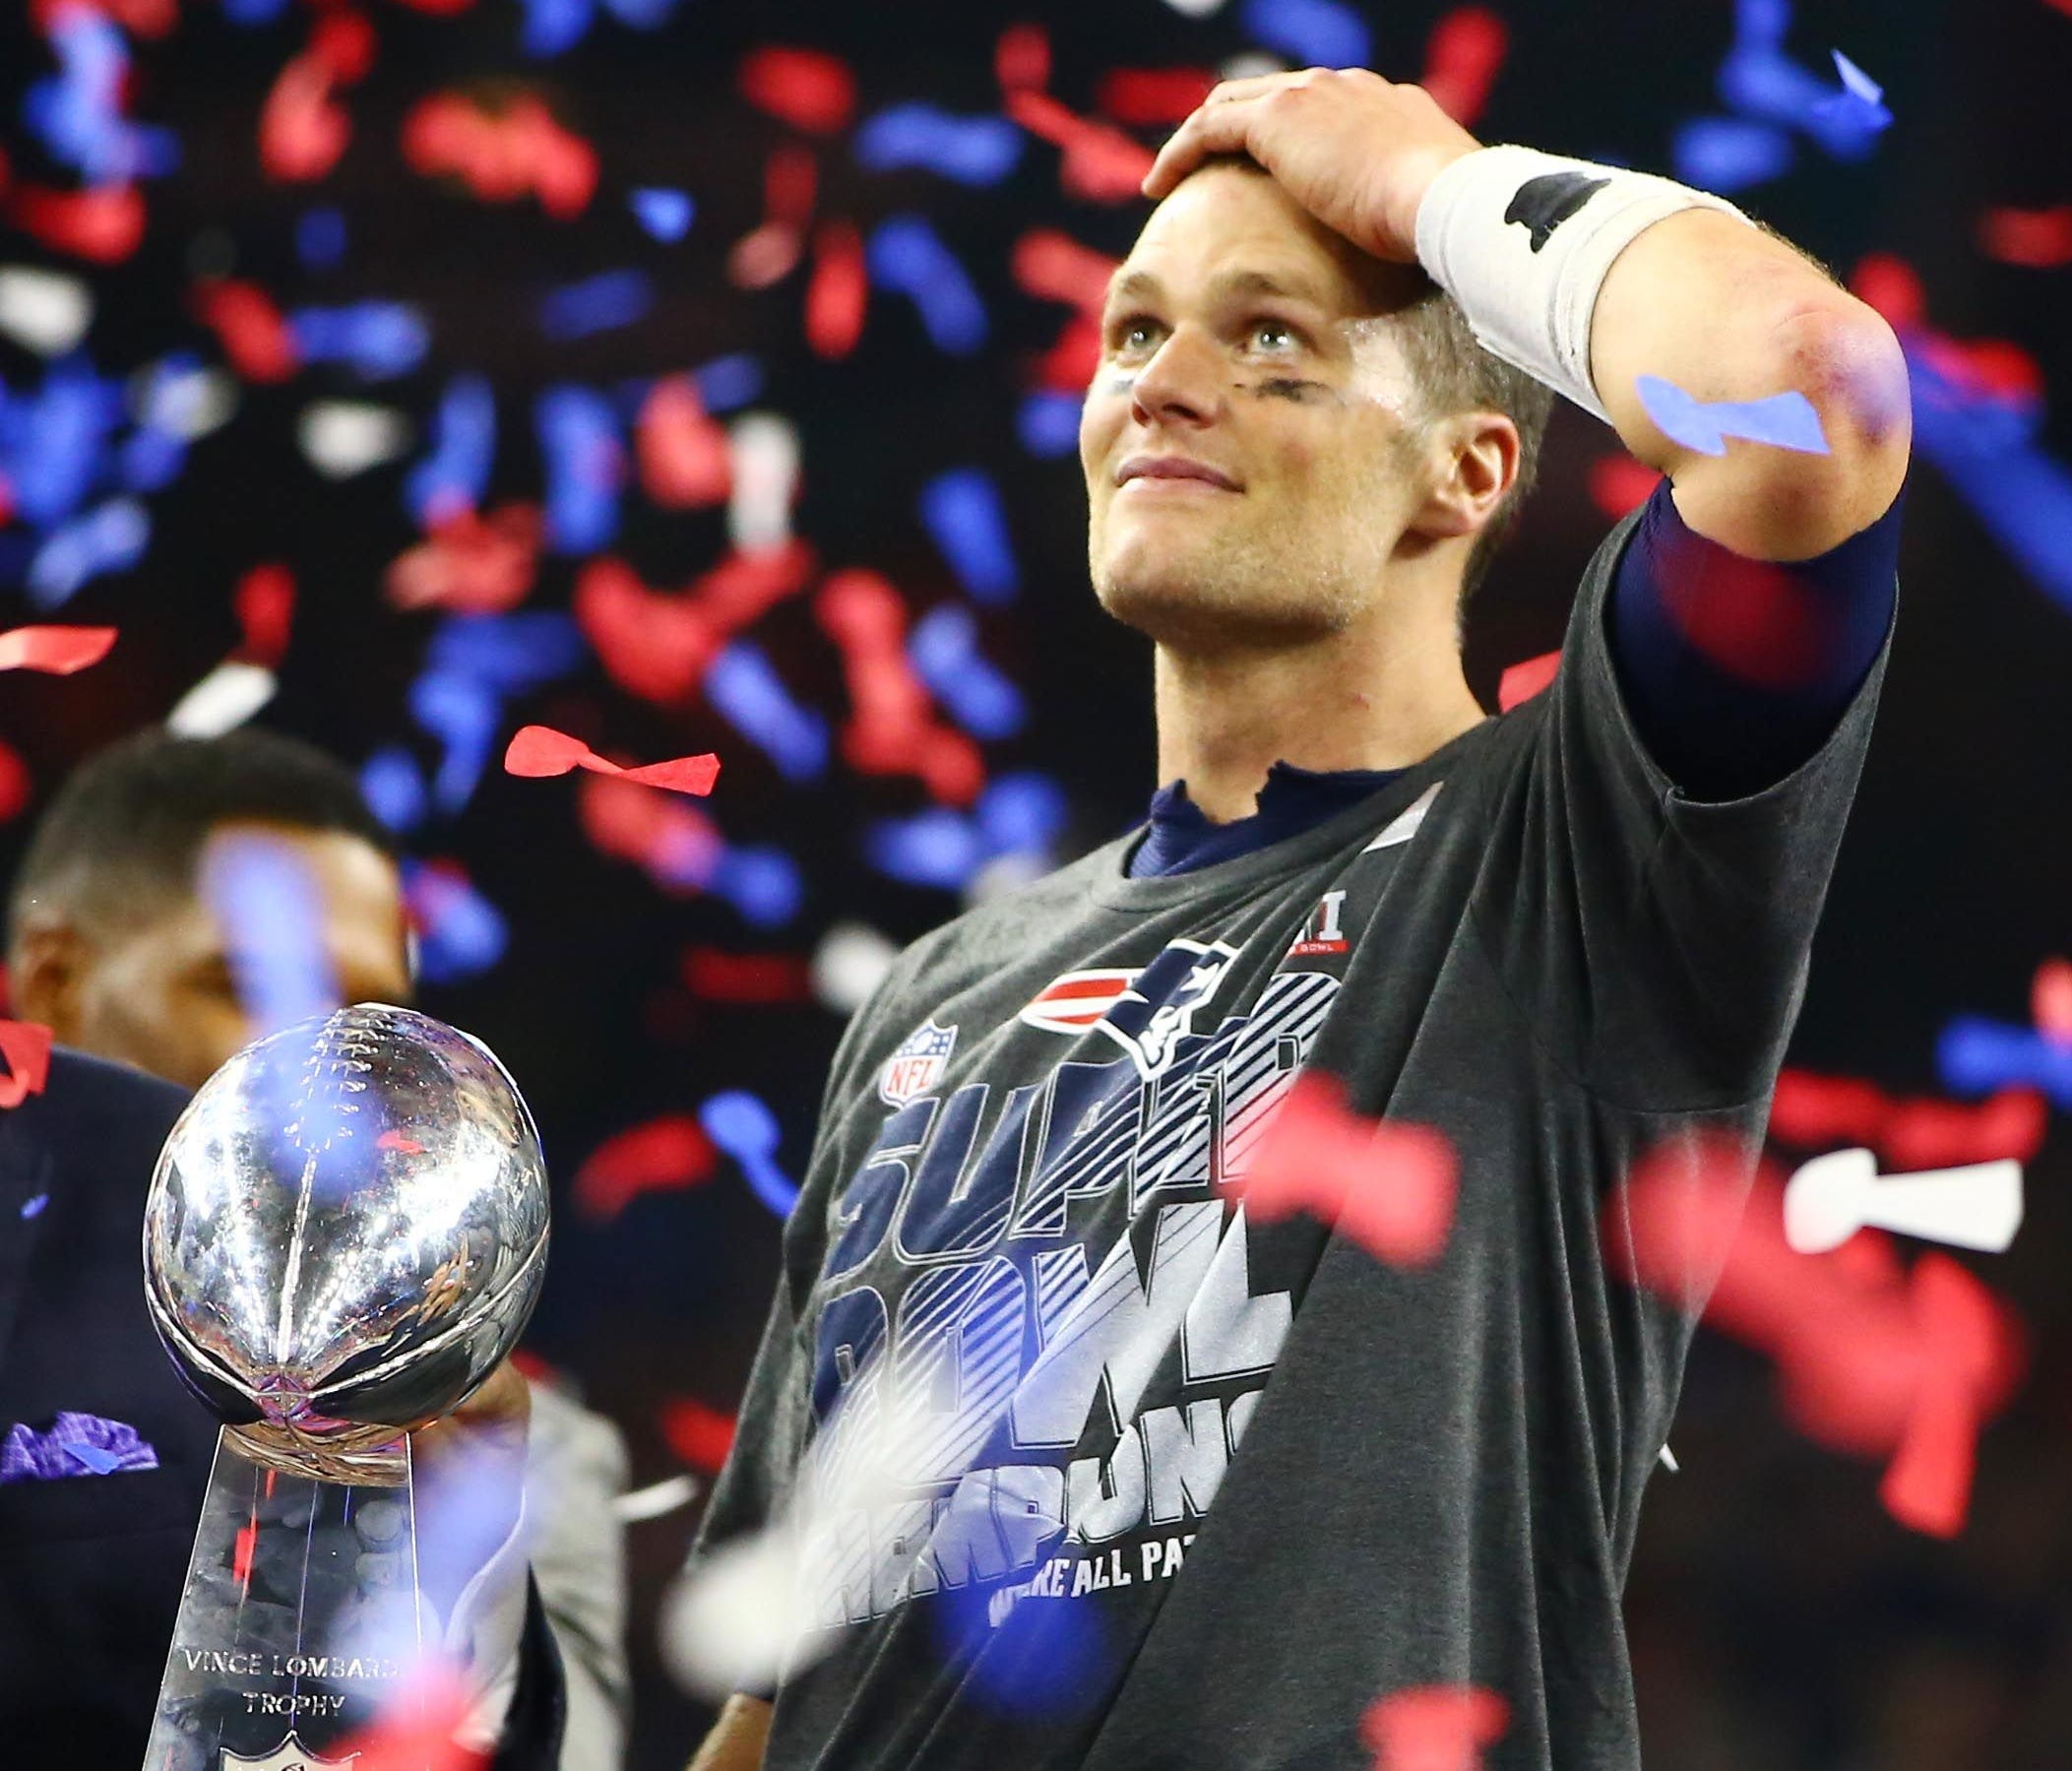 New England Patriots quarterback Tom Brady (12) celebrates with the Vince Lombardi Trophy after defeating the Atlanta Falcons during Super Bowl LI at NRG Stadium.